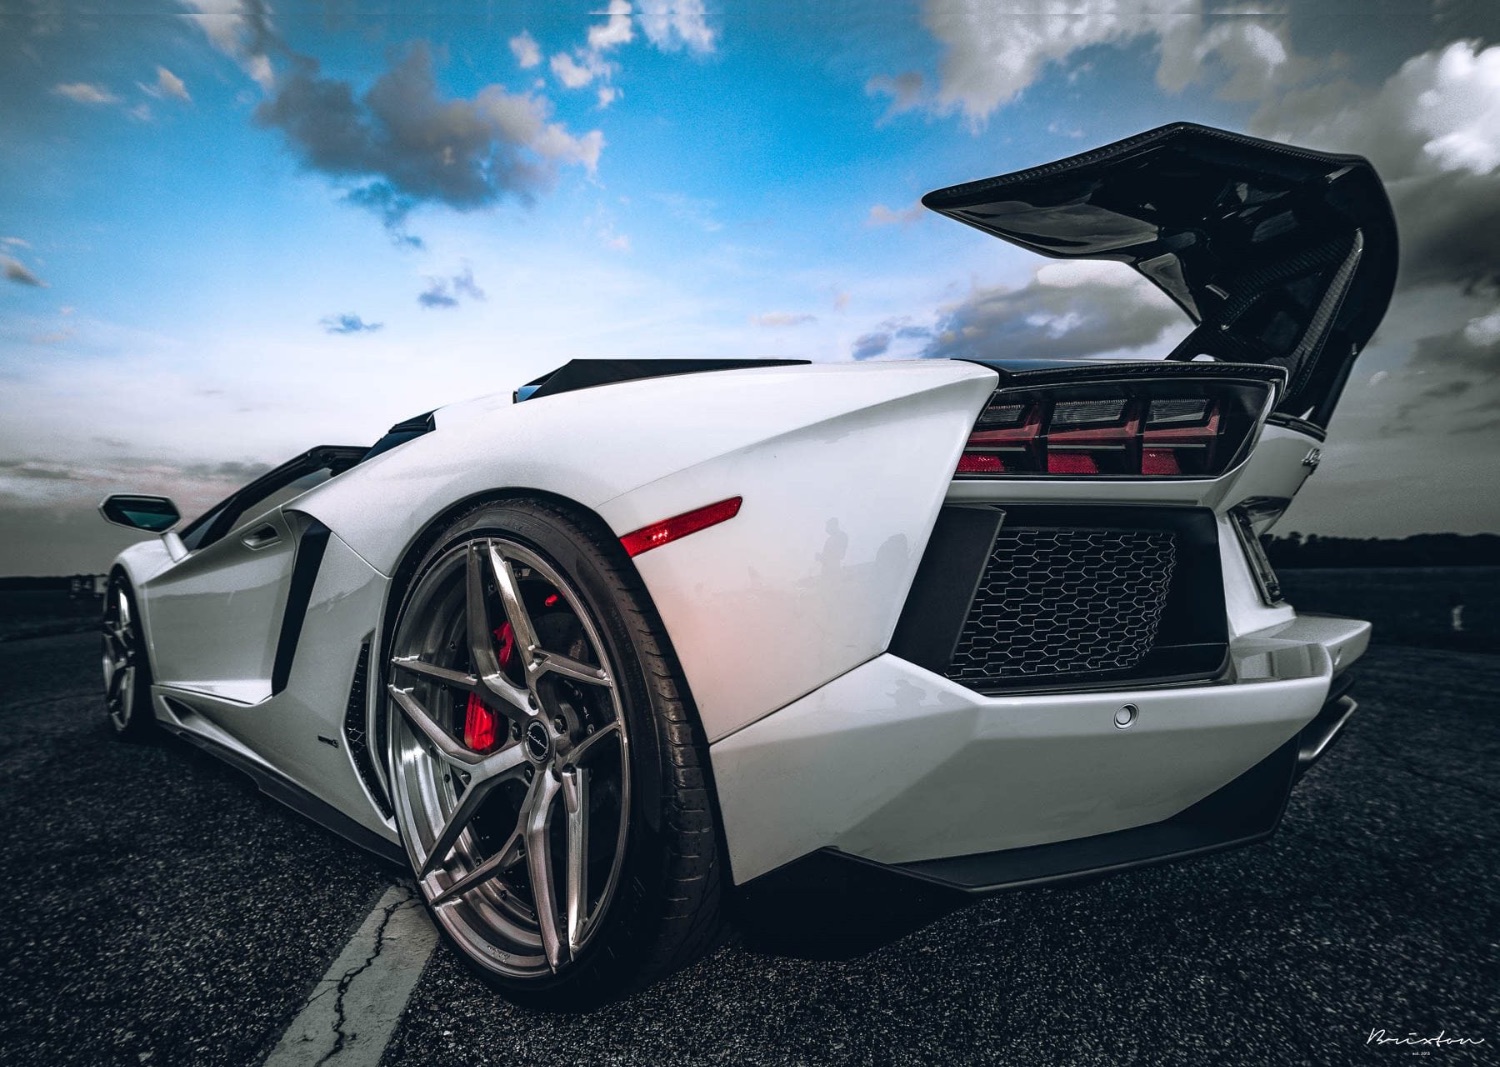 white-lamborghini-aventador-roadster-brixton-forged-pf5-duo-series-forged-wheels-concave-brushed-single-tint-21-22-4-1800x1281